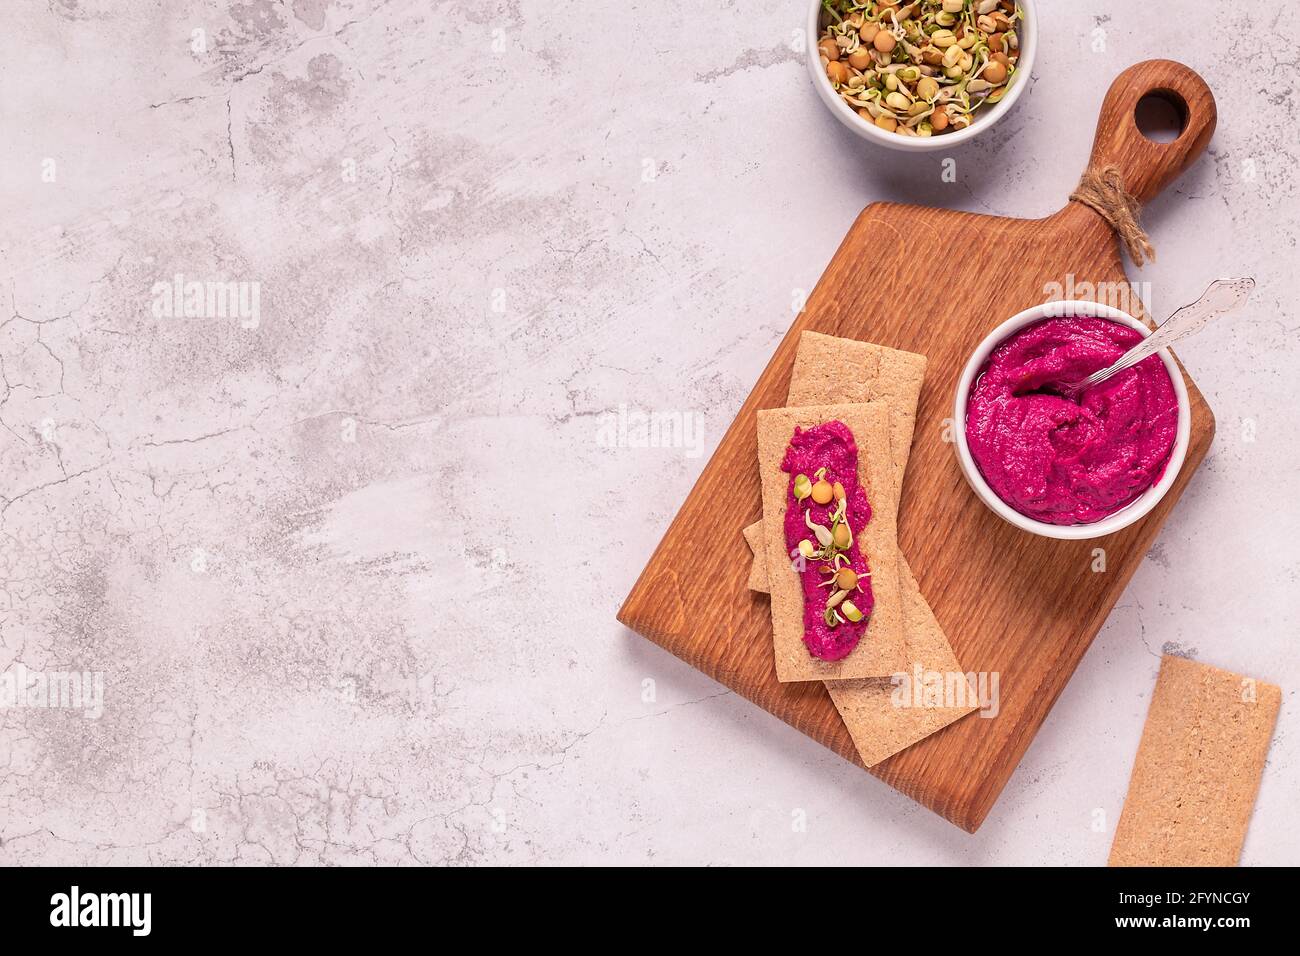 Vegetarian, vegan snack - beetroot hummus, sprouted grains and whole grain crisps. Stock Photo